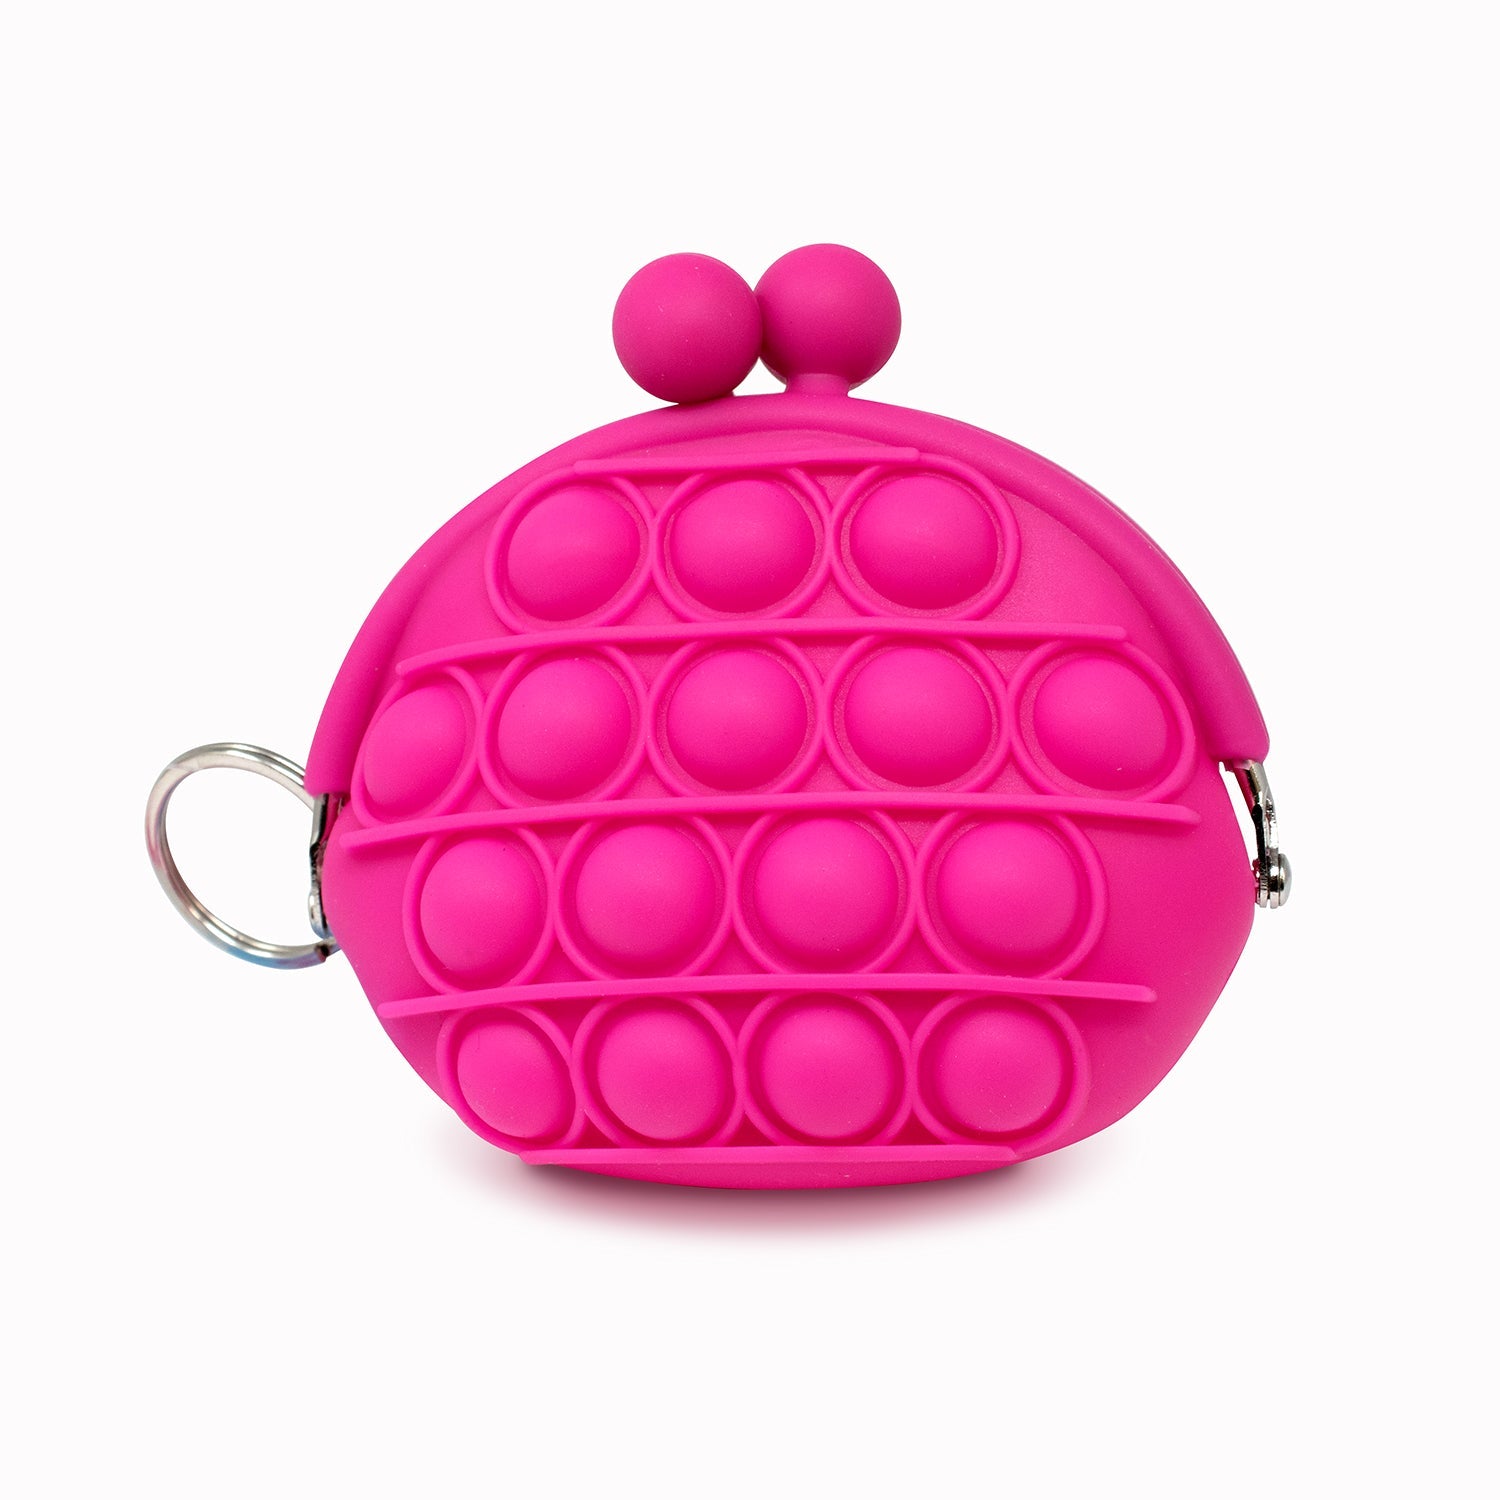 Mini Bubble Pop Clasp Purse, pink. This fidget toy coin purse uses high quality silicone rubber materials. Not just a toy, it is also practical coin purse that not only can store small items, but also a sensory toy. Just pressing the bubble down makes a big, crisp popping sound! Fashionable and super cute design for kids, it can be used as a fashion accessory or coin purse you can store change, tissues, snacks, lipstick, keys and more inside.